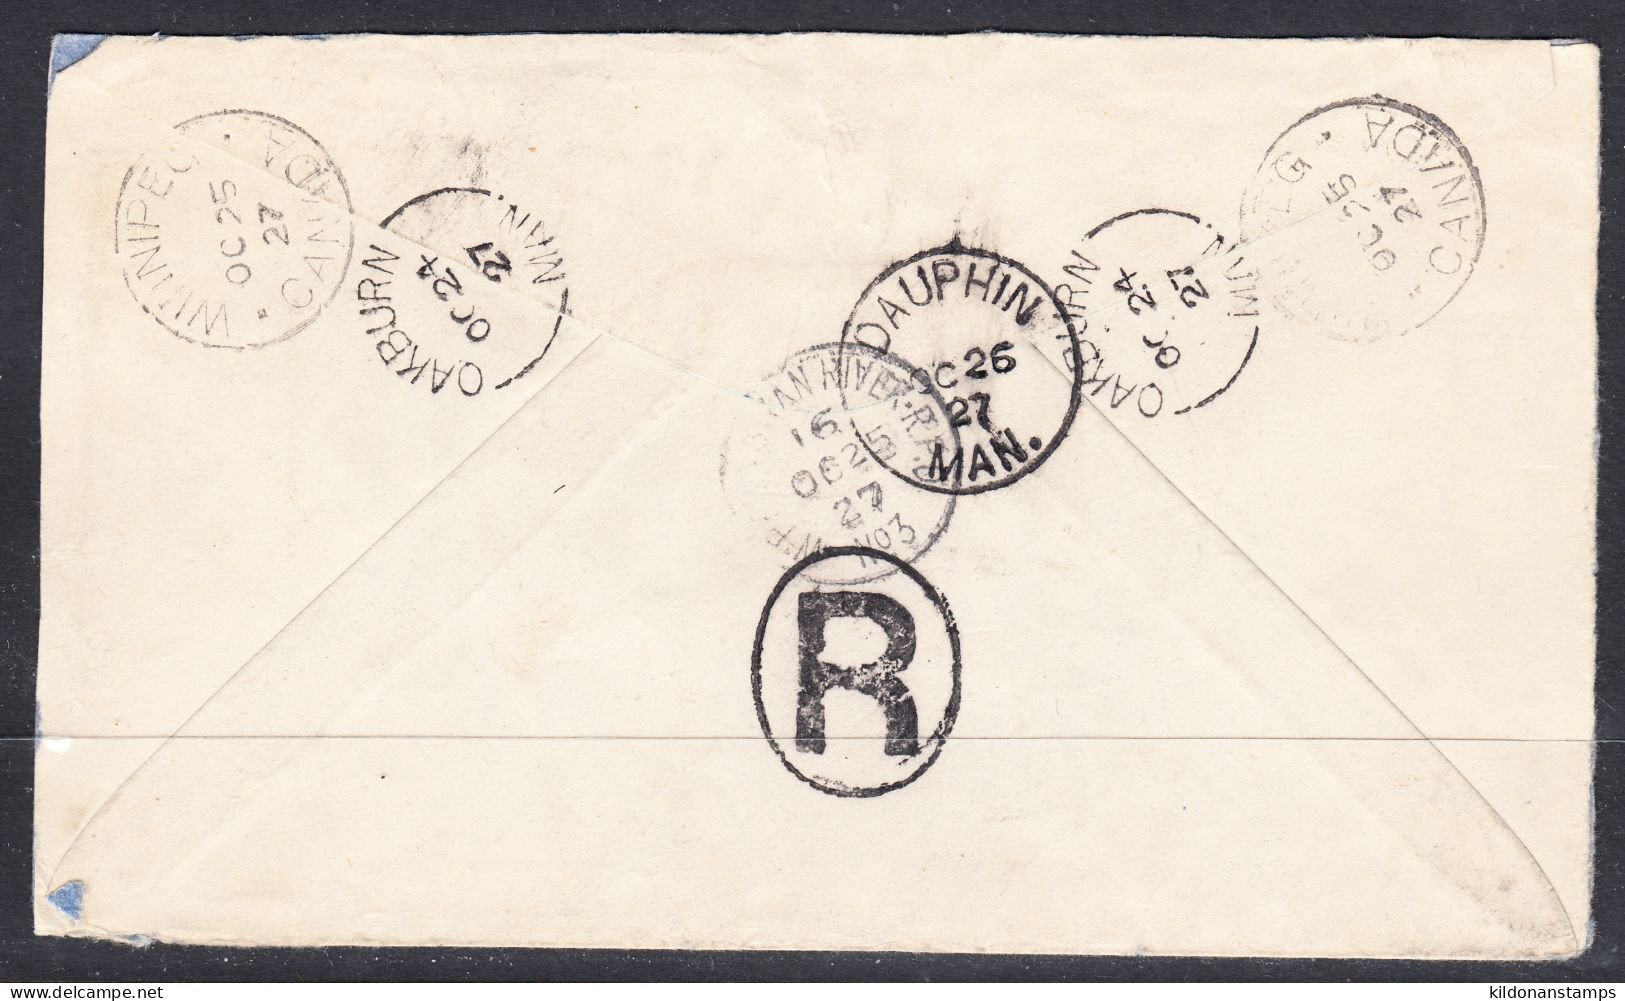 Canada Cover, Registered, Oakburn Manitoba, Oct 24 1927, A3 Broken Circle Postmark, To Dominion Lands Office (Dauphin) - Briefe U. Dokumente